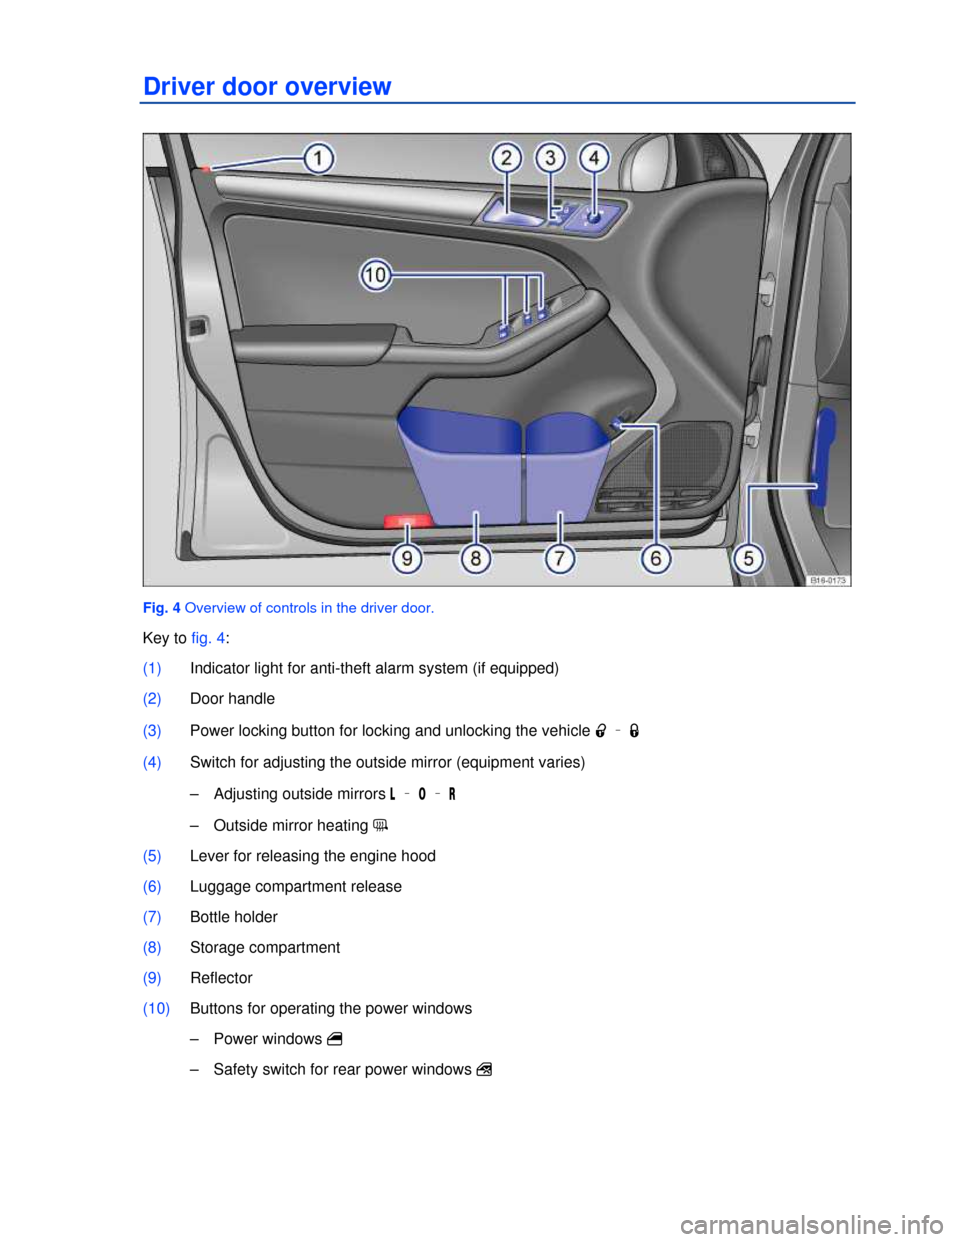 VOLKSWAGEN JETTA 2013 1B / 6.G Owners Manual  
Driver door overview 
 
Fig. 4 Overview of controls in the driver door. 
Key to fig. 4: 
(1) Indicator light for anti-theft alarm system (if equipped)  
(2) Door handle  
(3) Power locking button fo